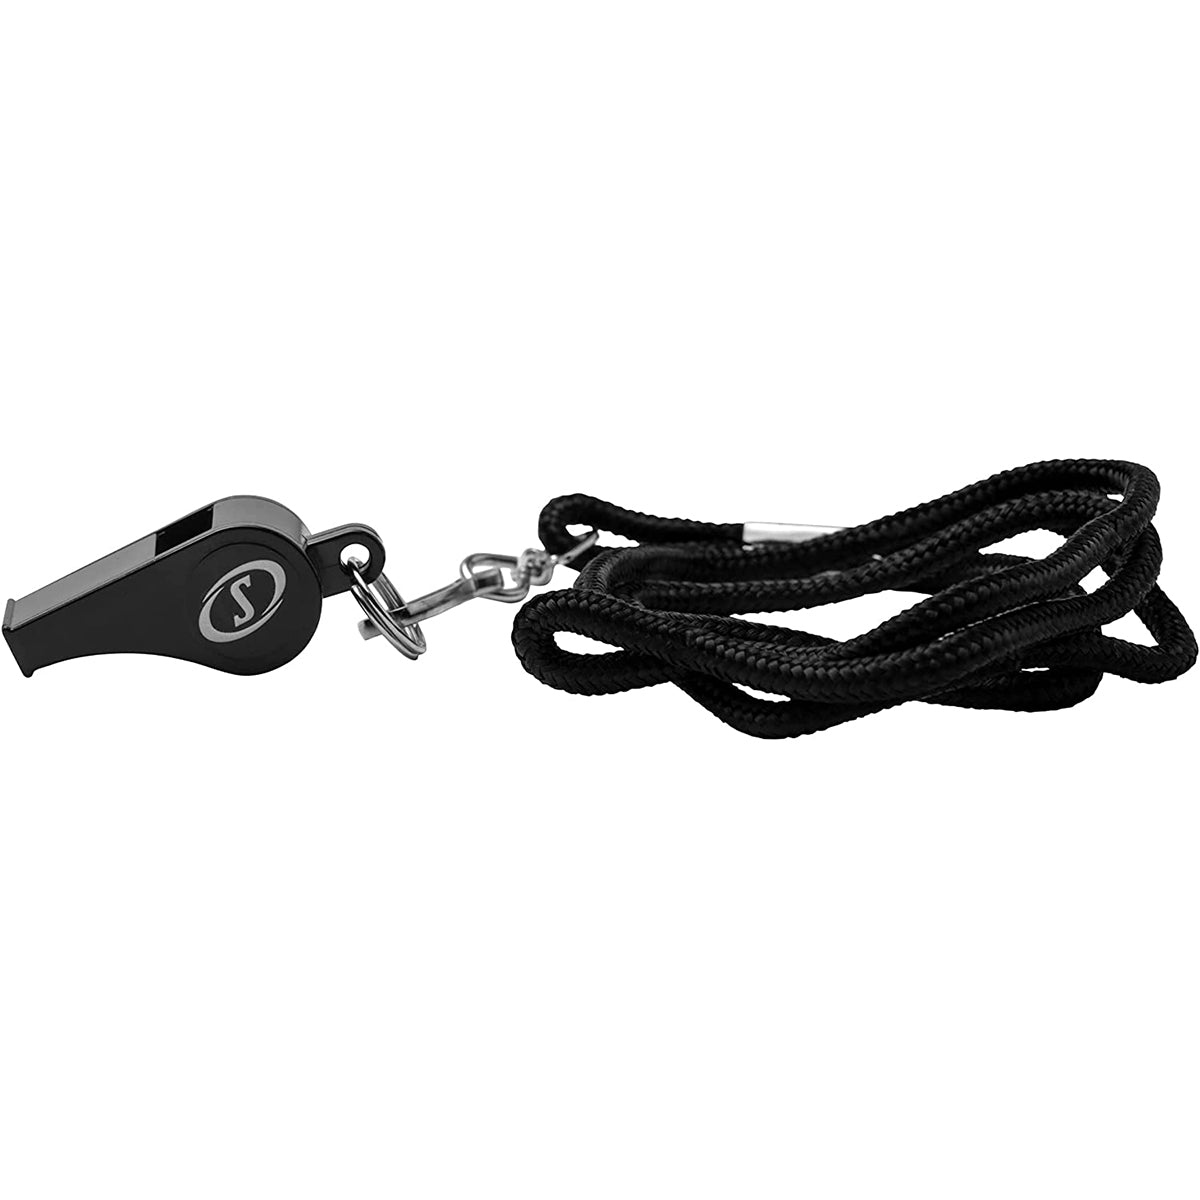 Spalding Plastic Whistle with Lanyard 2-Pack - Black Spalding